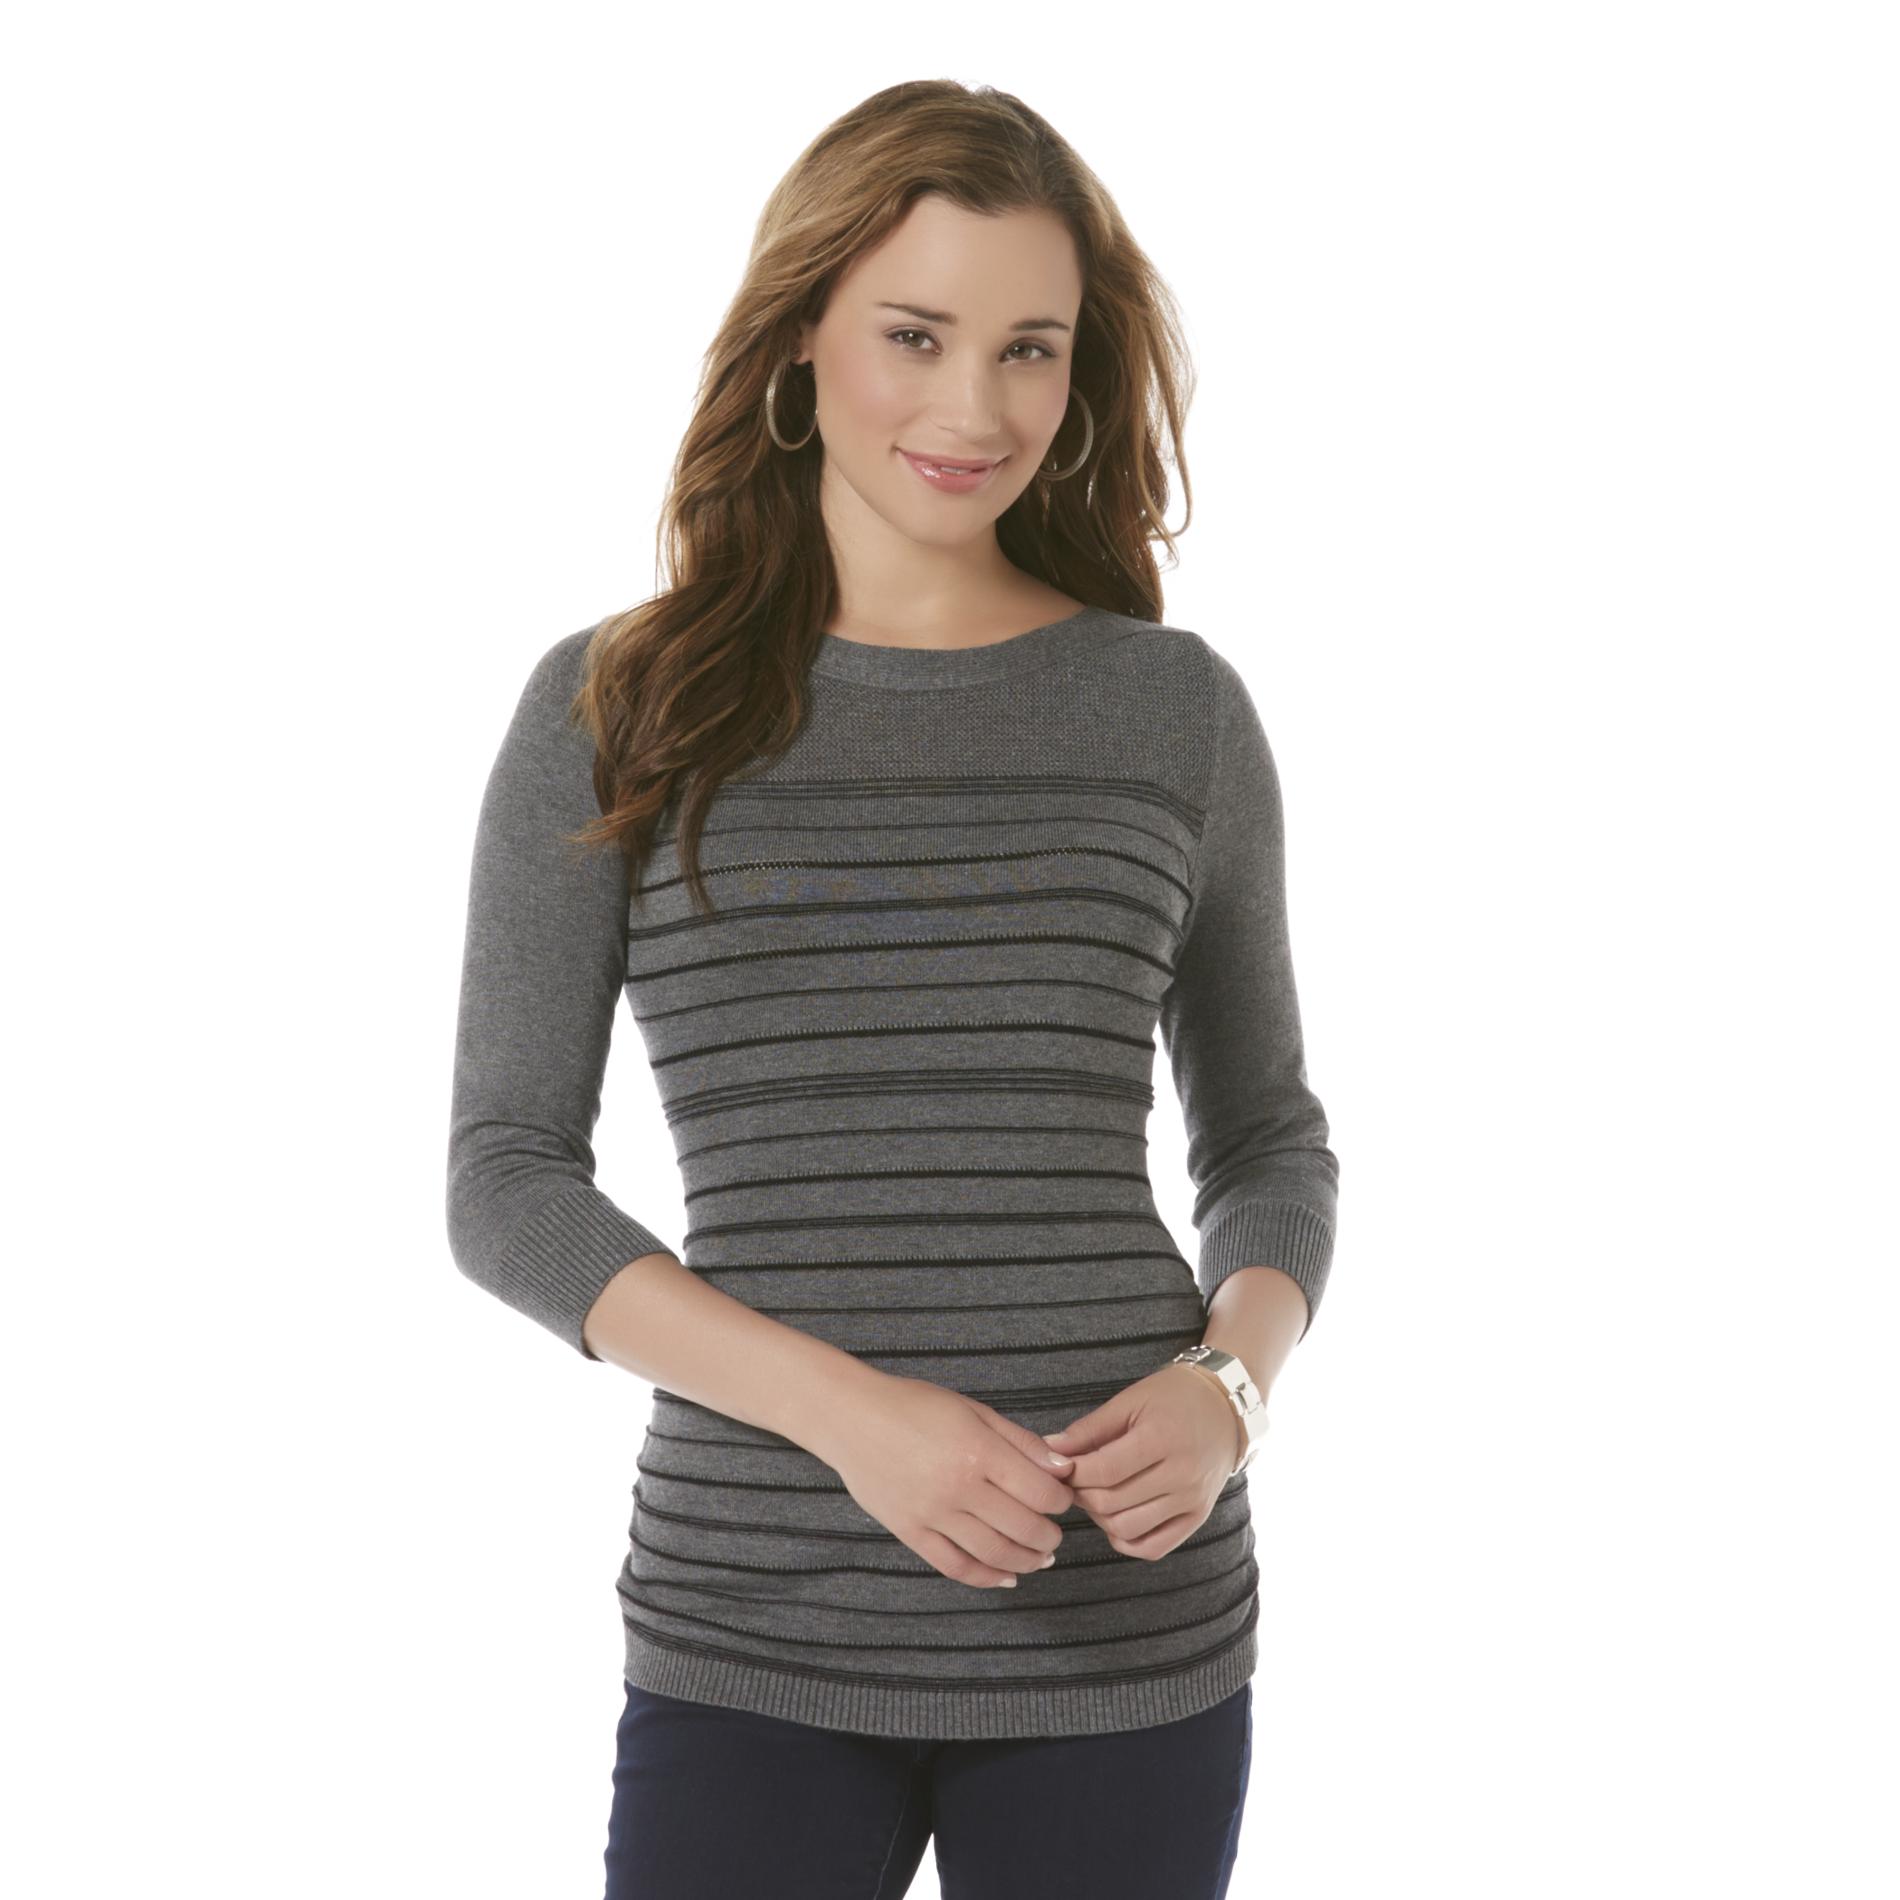 Attention Women's Shirred Sweater - Striped